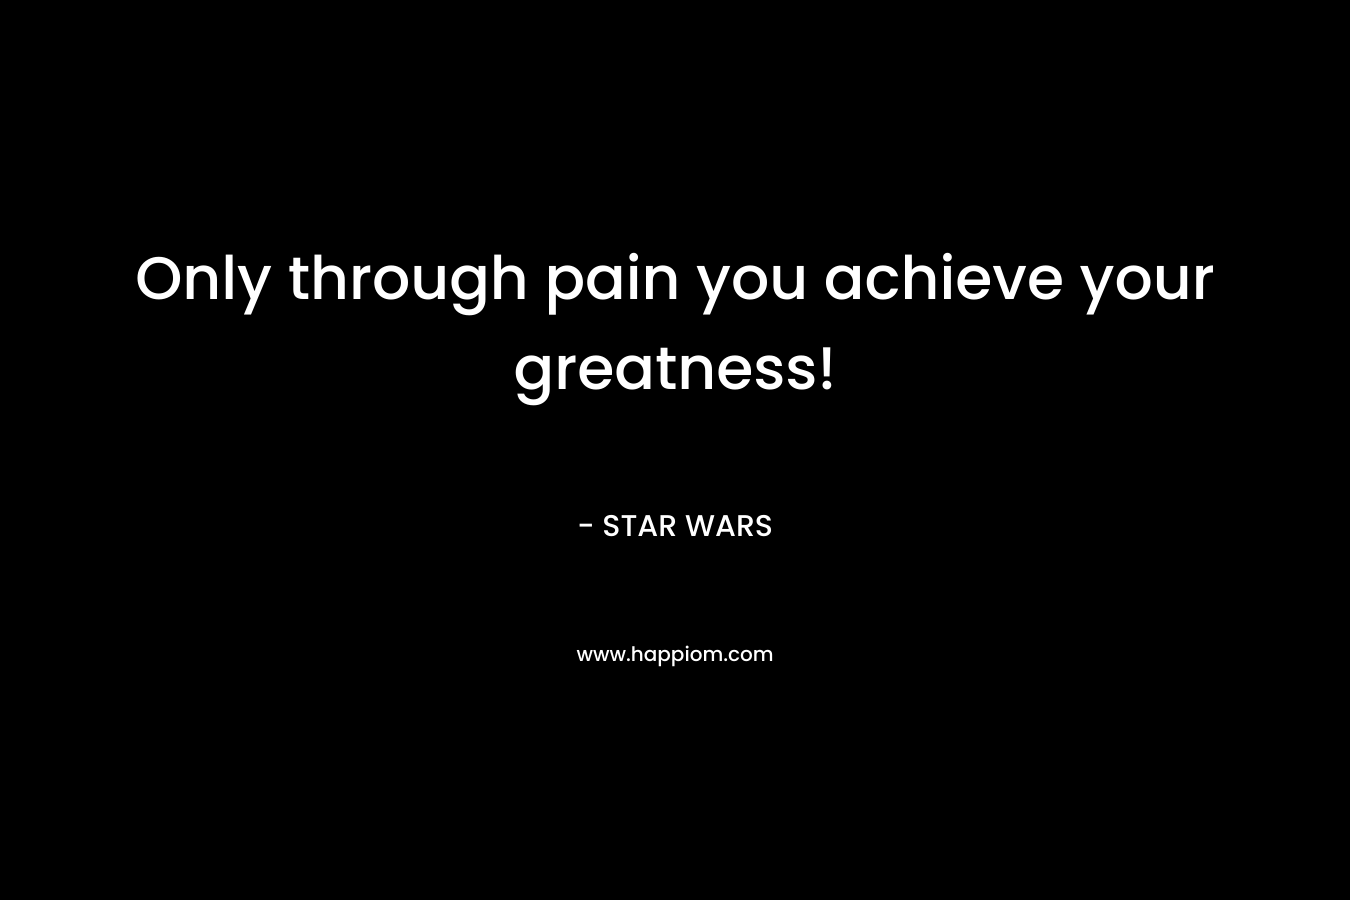 Only through pain you achieve your greatness!